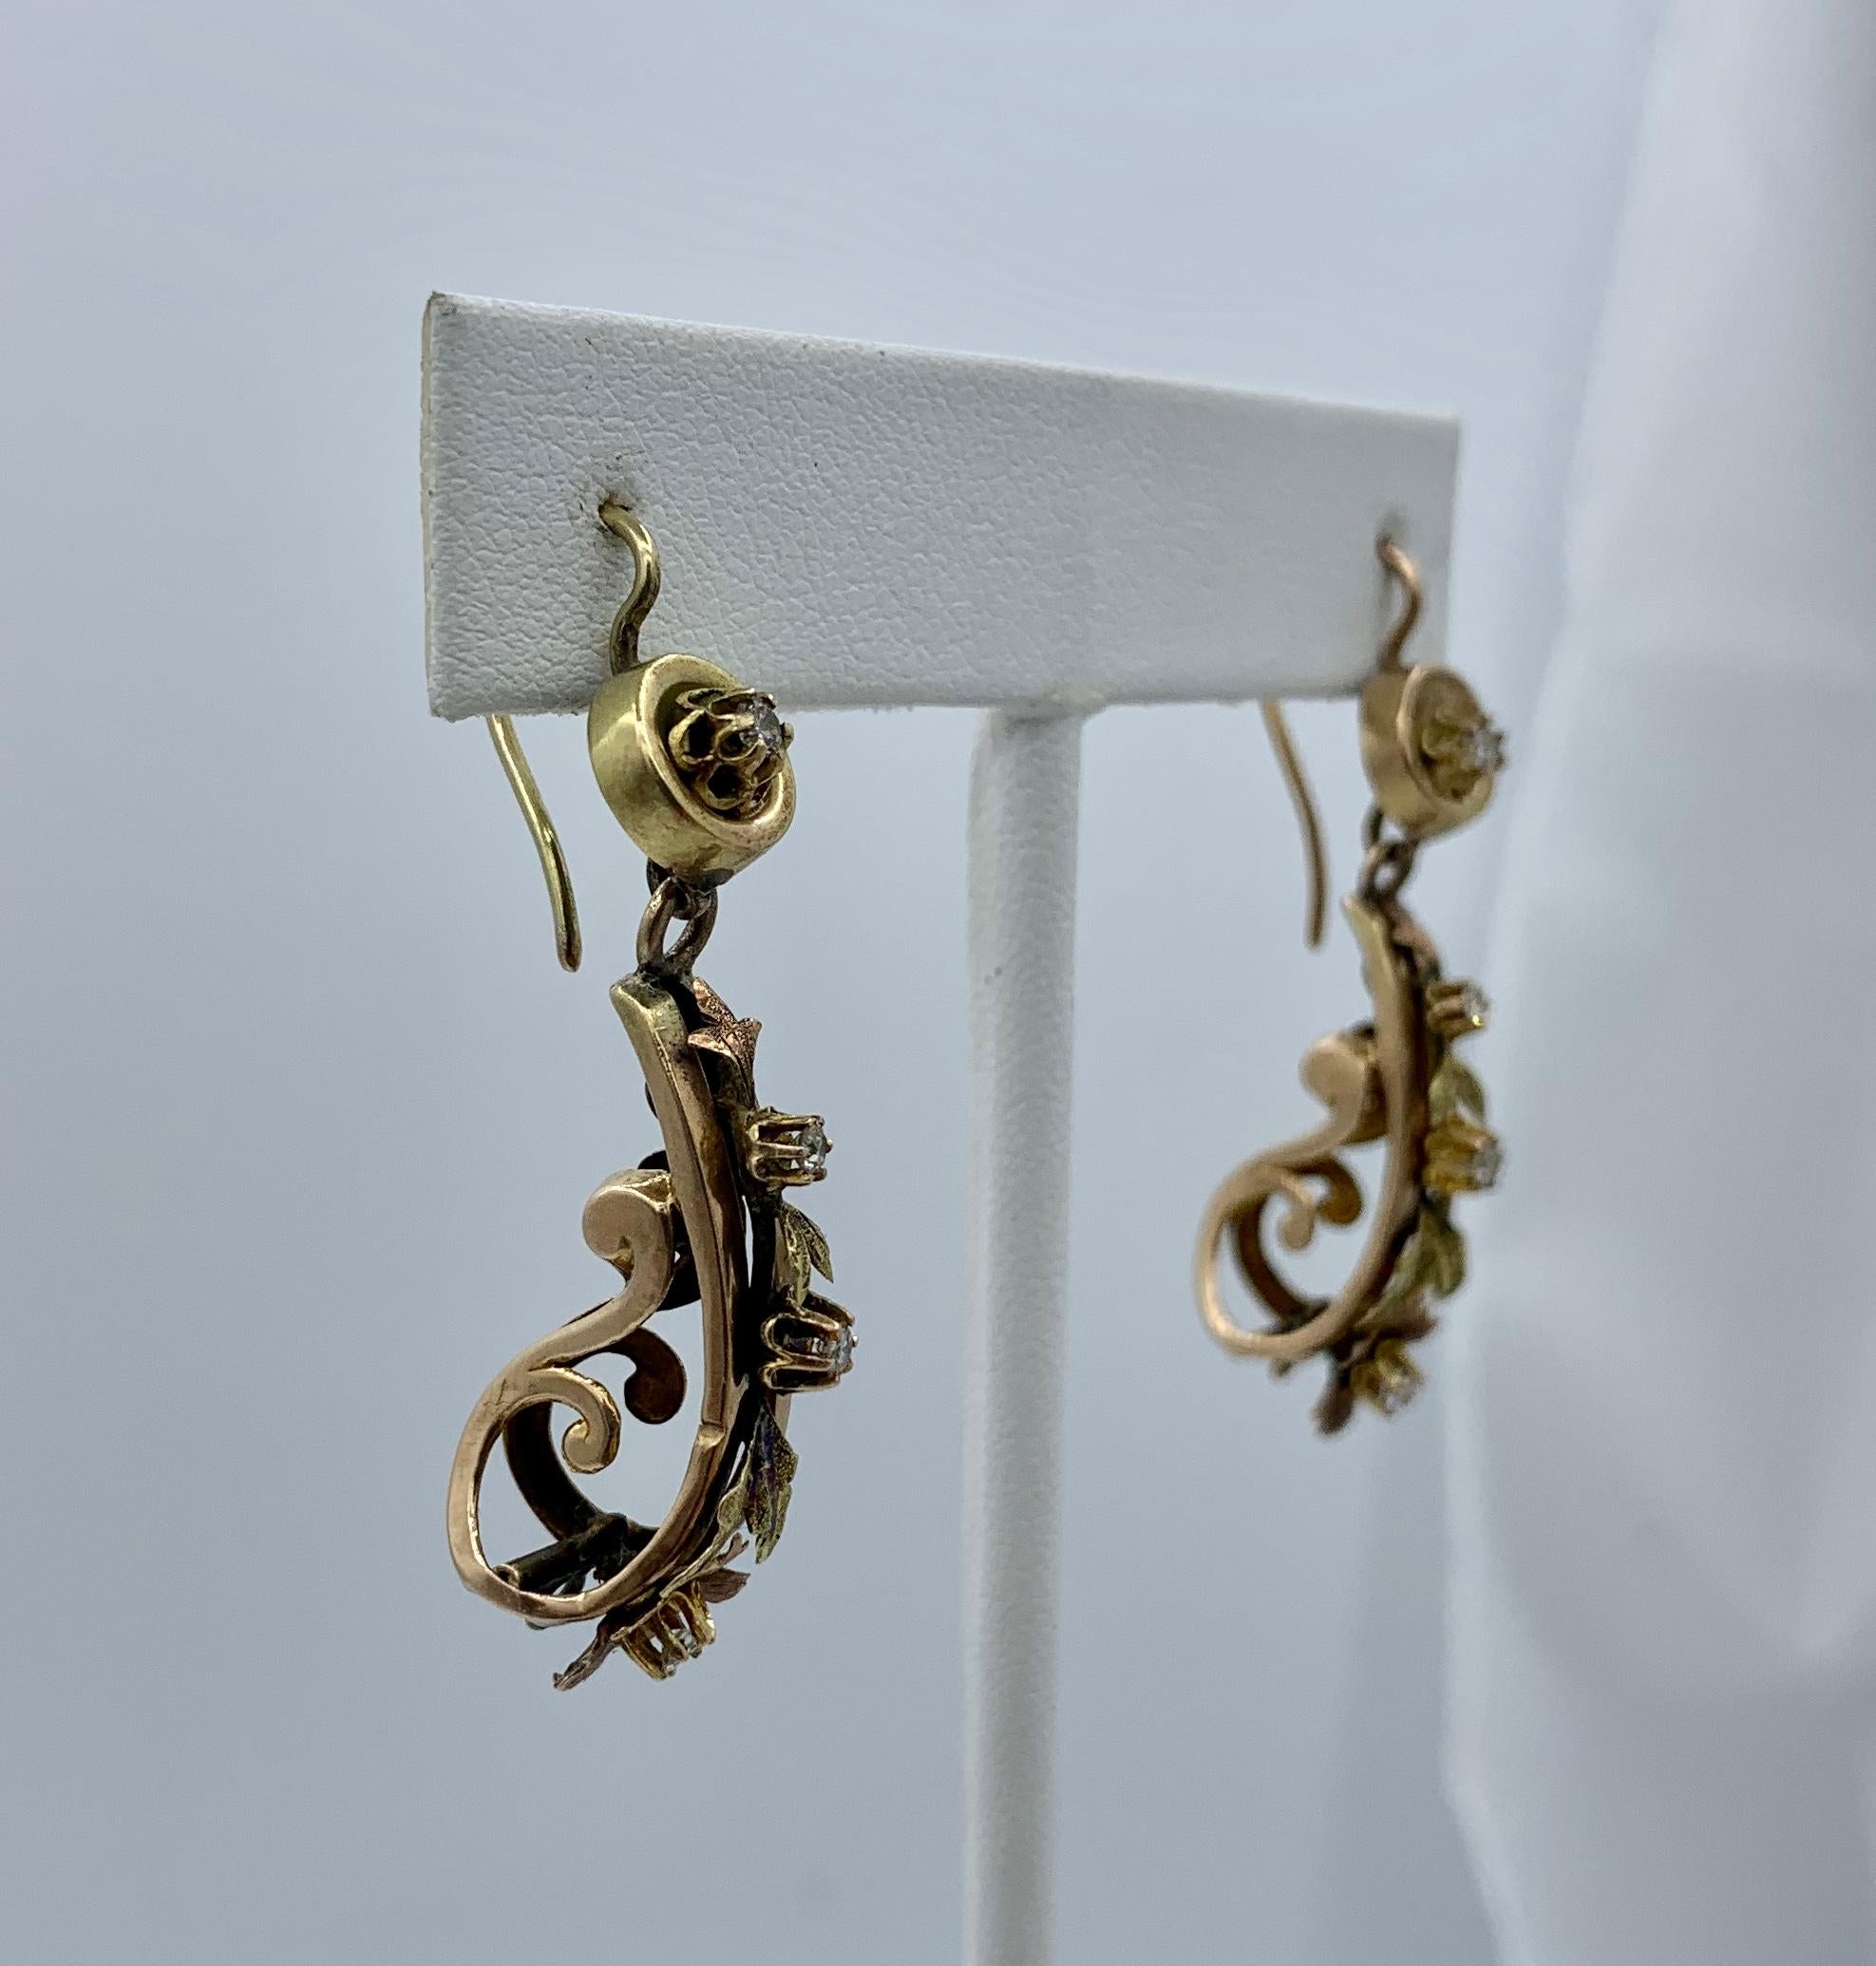 This is rare pair of early Old Mine Cut Diamond Antique Victorian flower and leaf motif Dangle Drop Earrings in 14 Karat Gold.   These antique earrings are of the highest quality.  They have extraordinary design with applied leaves leading to a